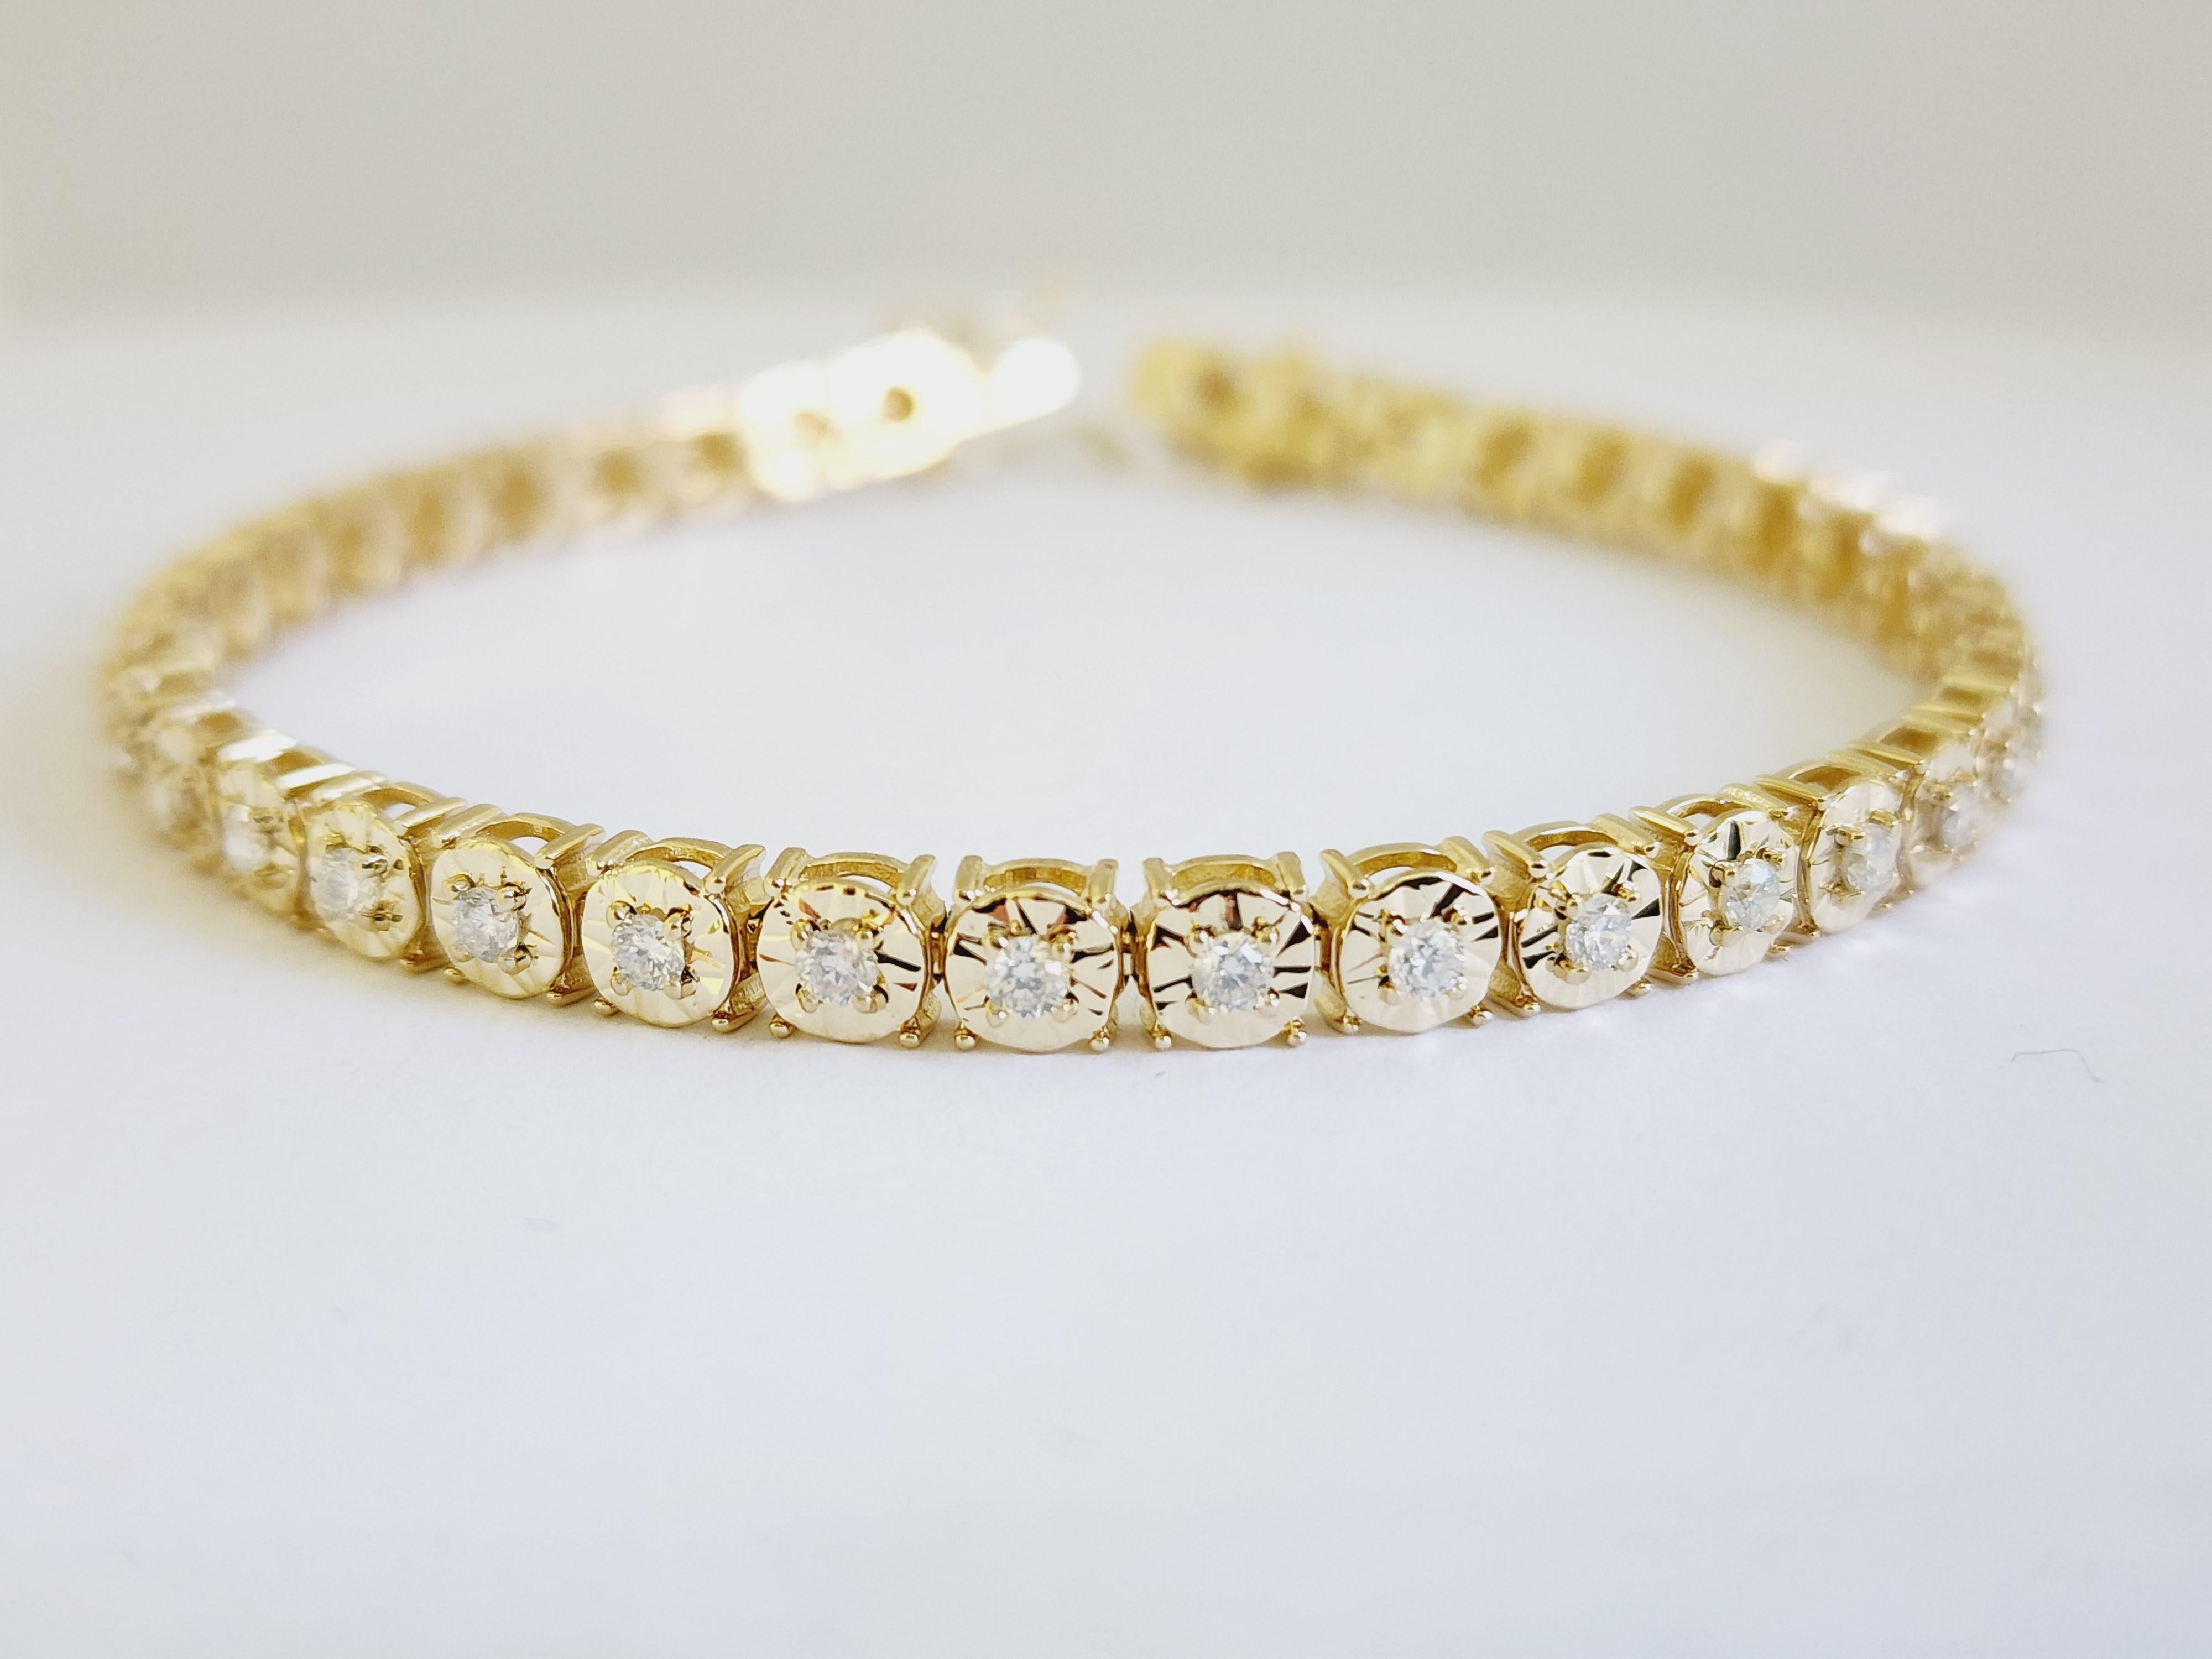 Natural Diamonds Approx. 1.51 carat total weight
Average Display Color: I, Clarity: SI
Metal Type: 4 Prong 14 karat yellow gold miracle Illusion setting
Length 7 inch 